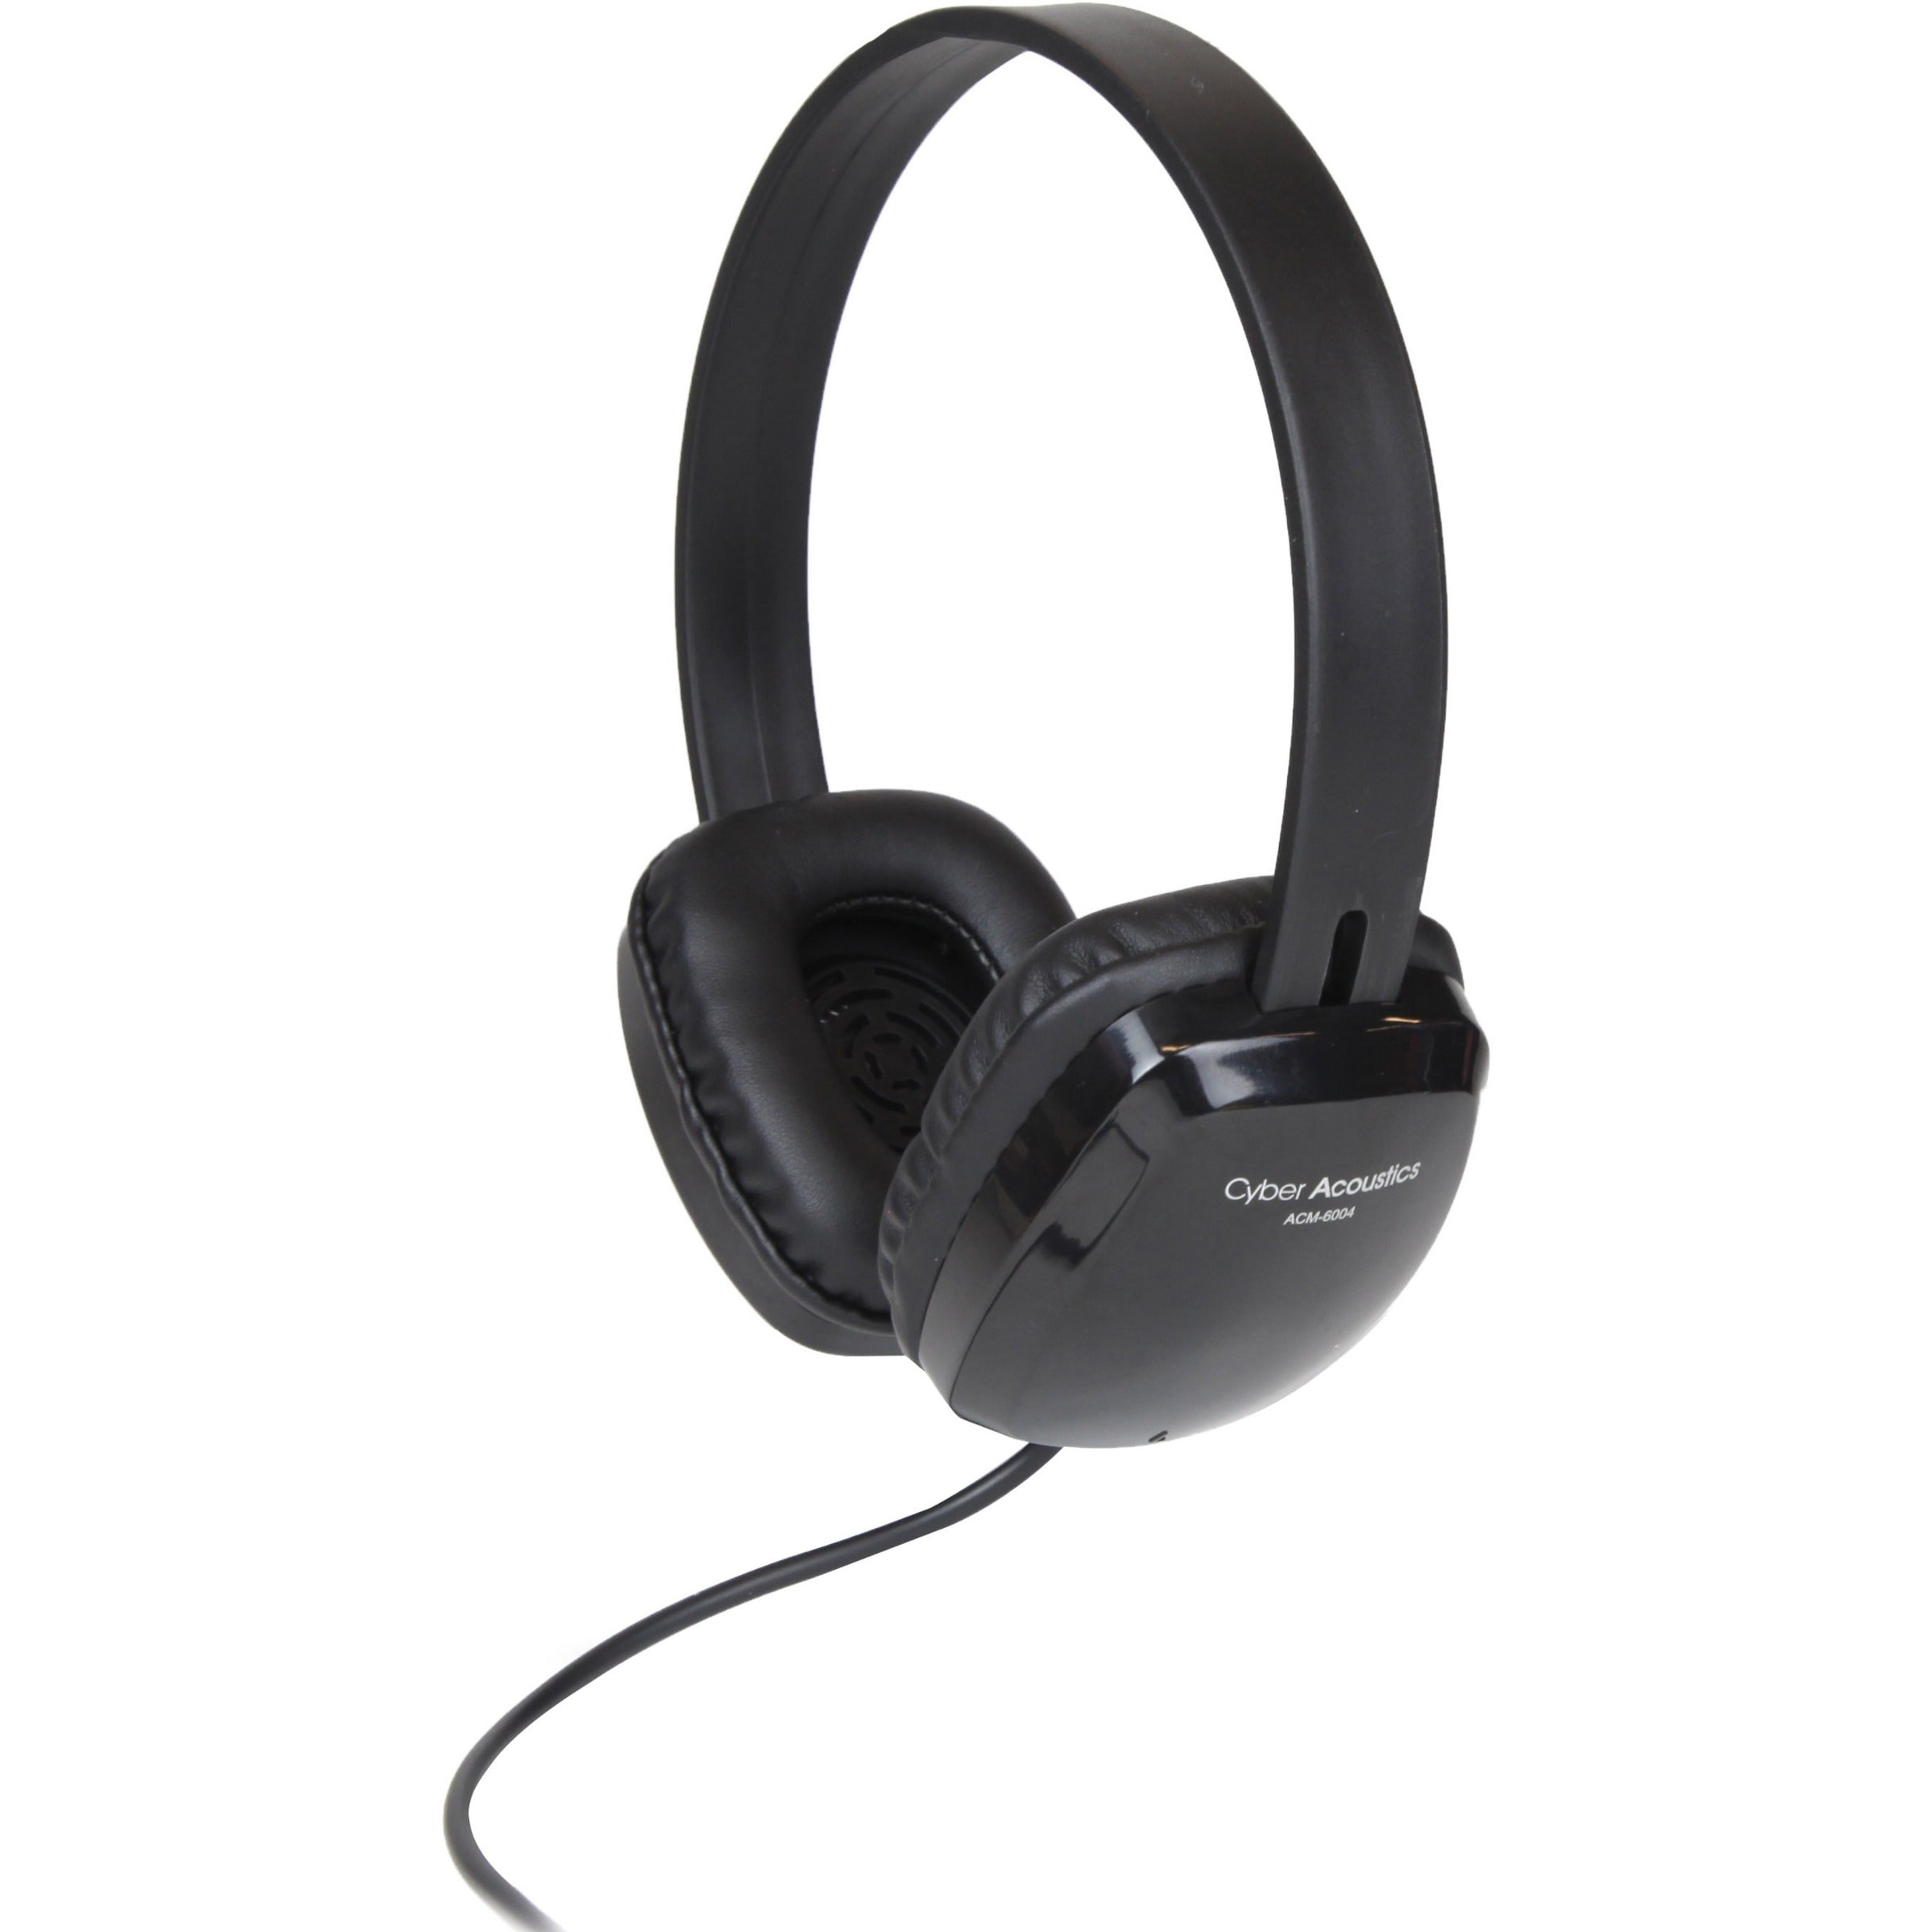 Cyber Acoustics ACM-6004 Stereo Headphones, Adjustable Headband, Lightweight, Durable, Robust, 6 ft Cable Length